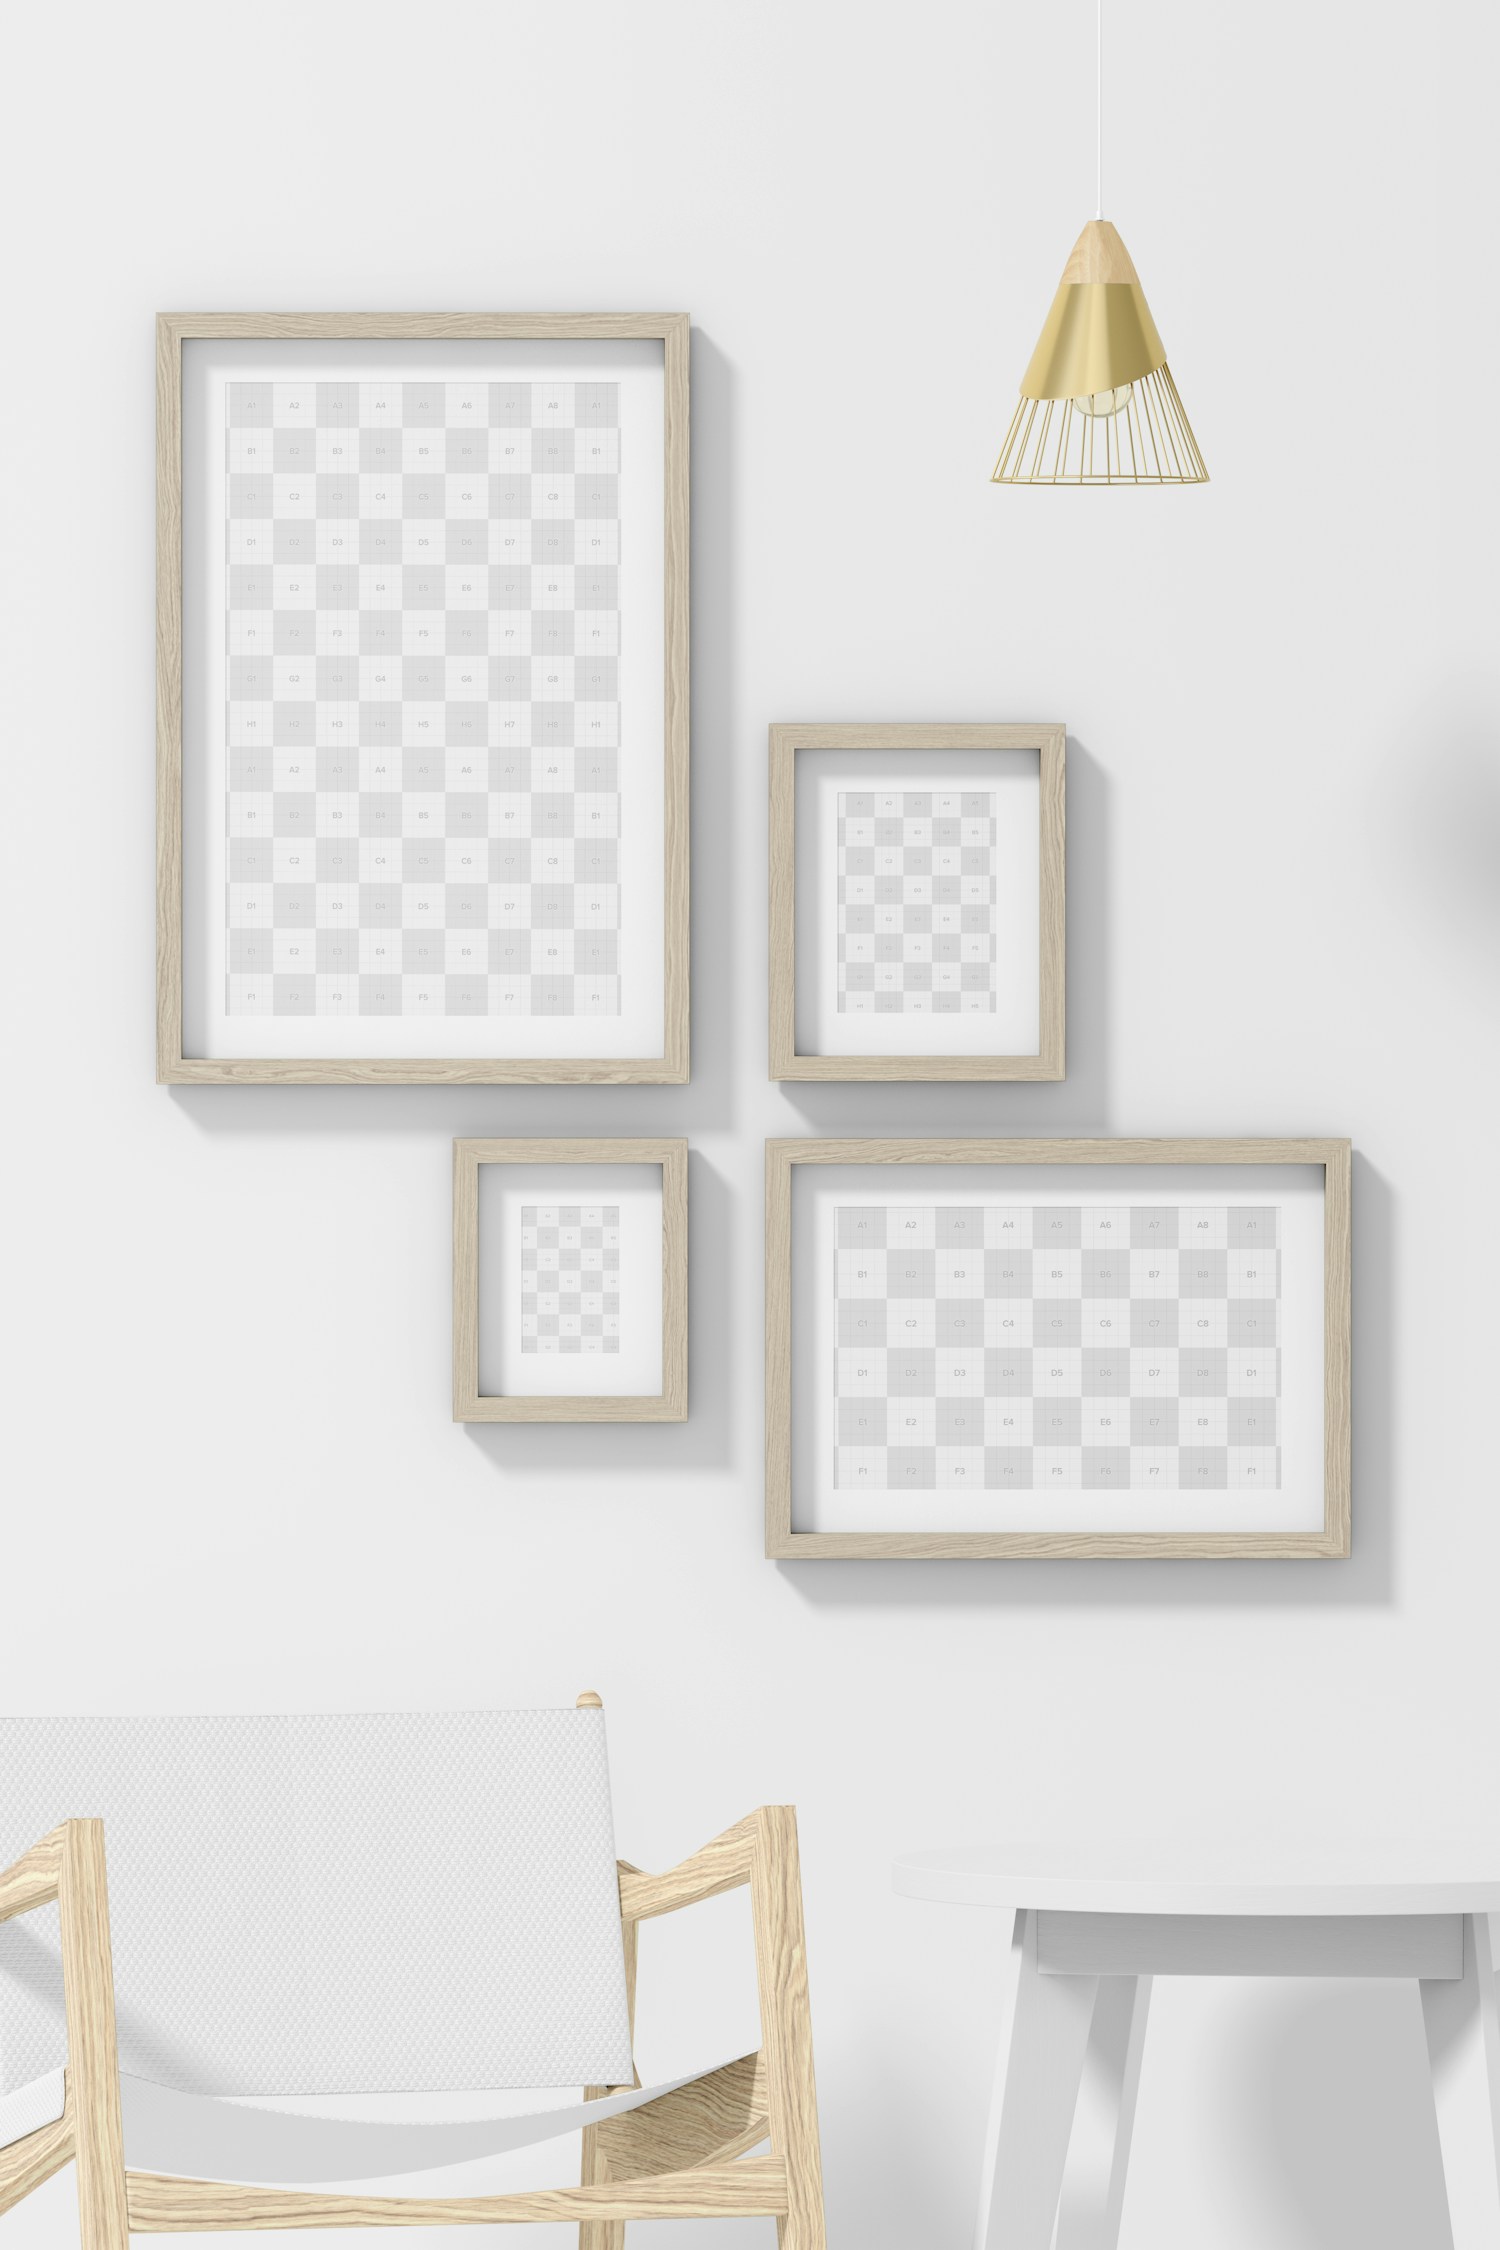 4 Gallery Frames with Rocking Chair Mockup, Front View